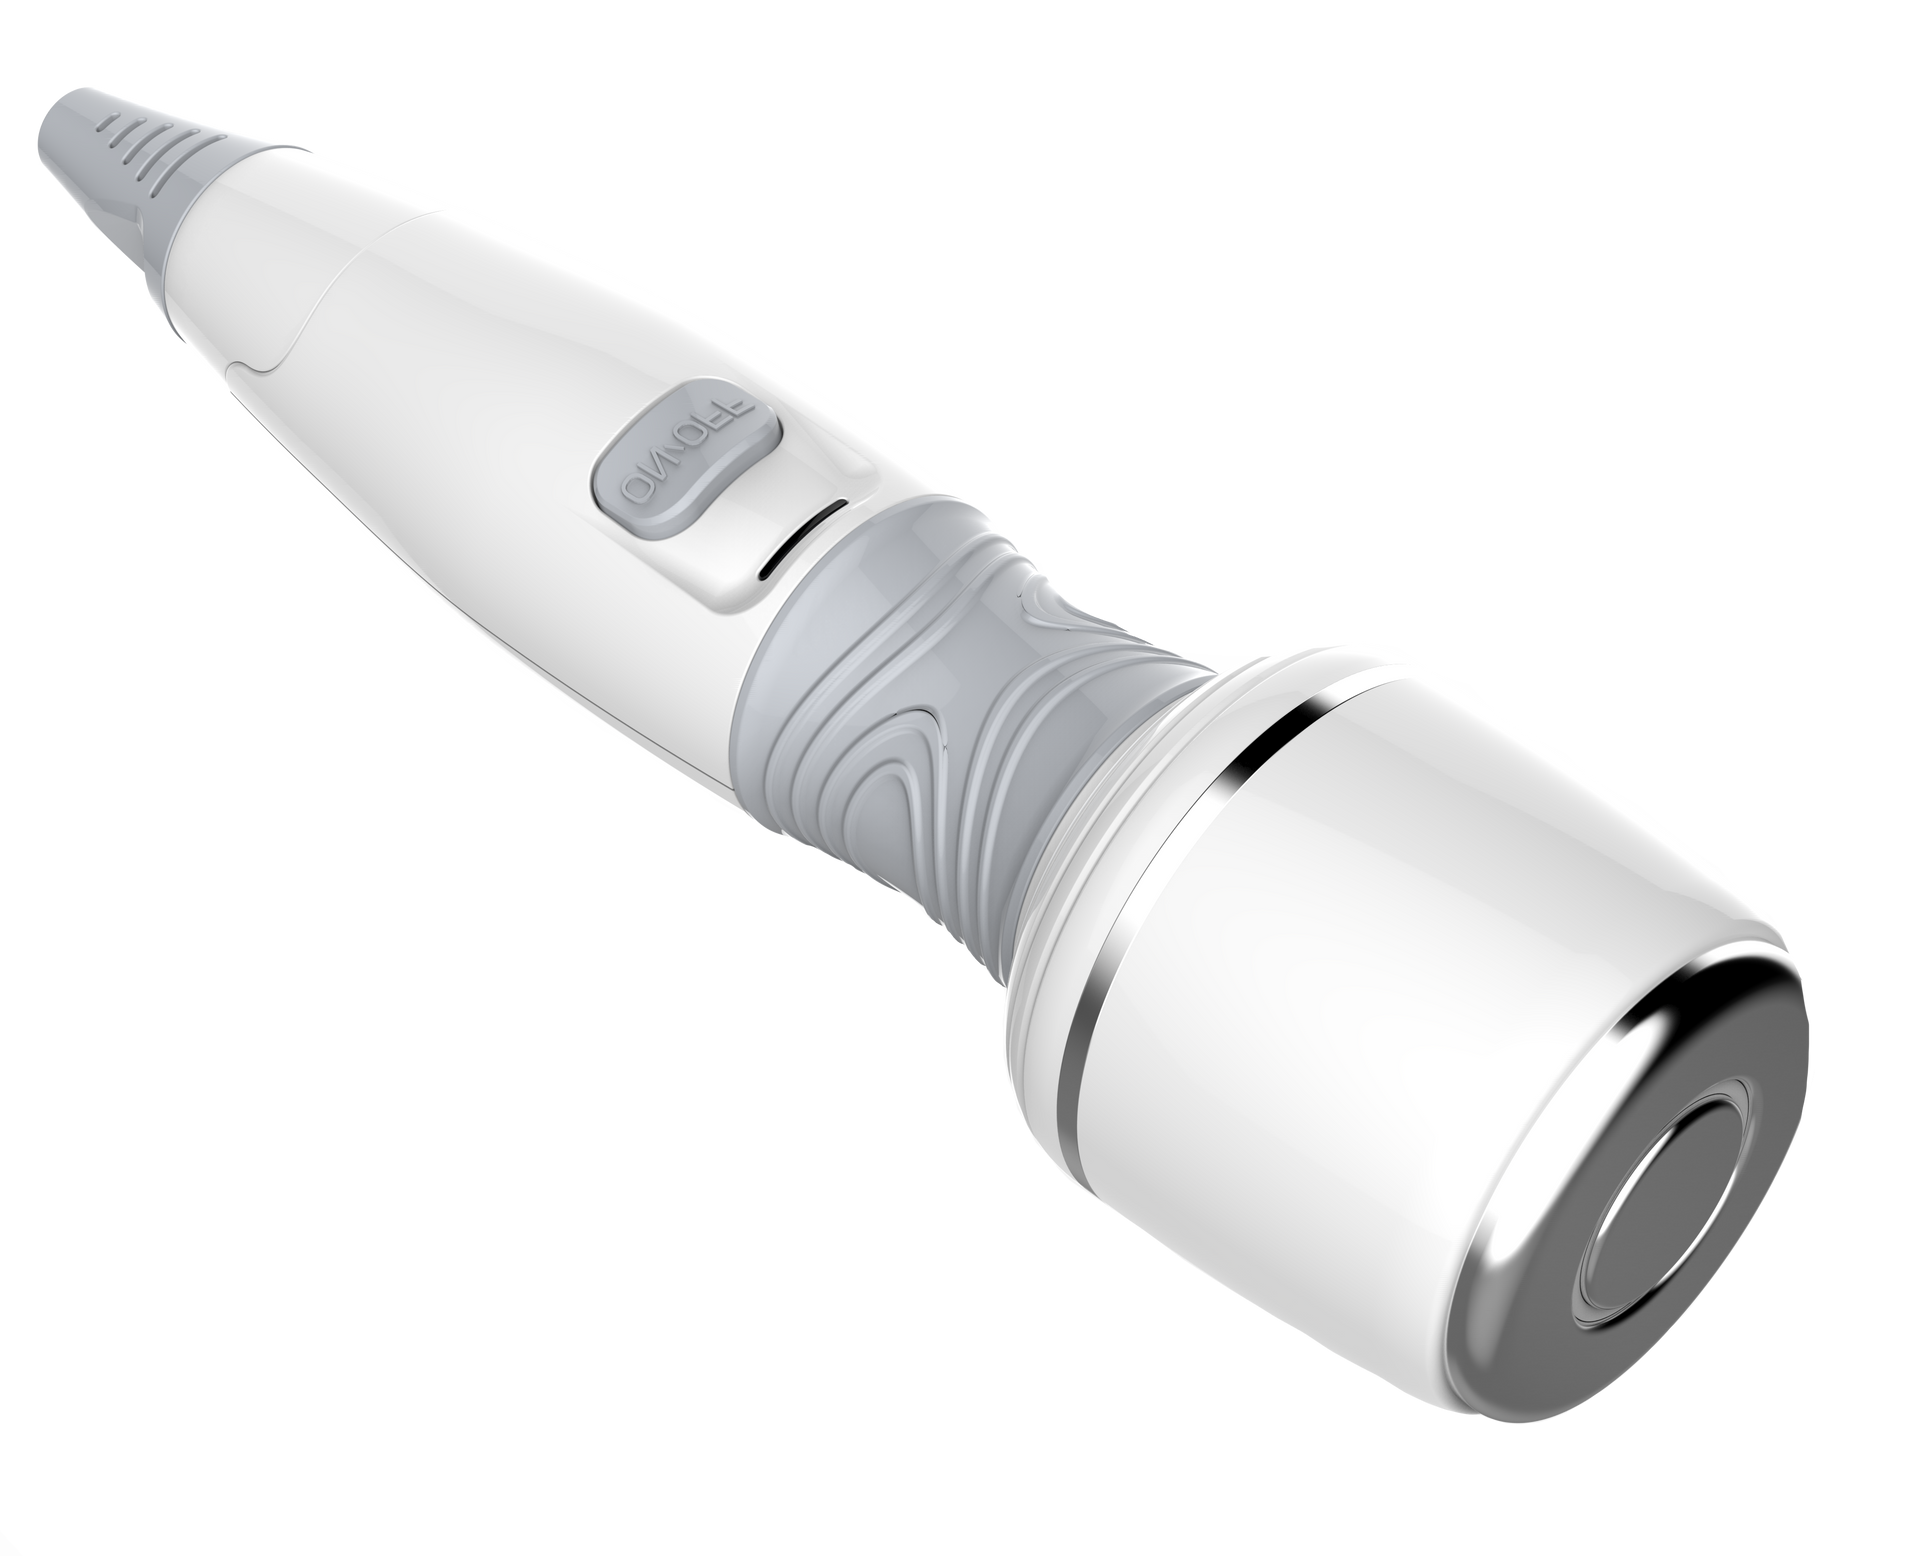 A white and gray massager with a button on the side.